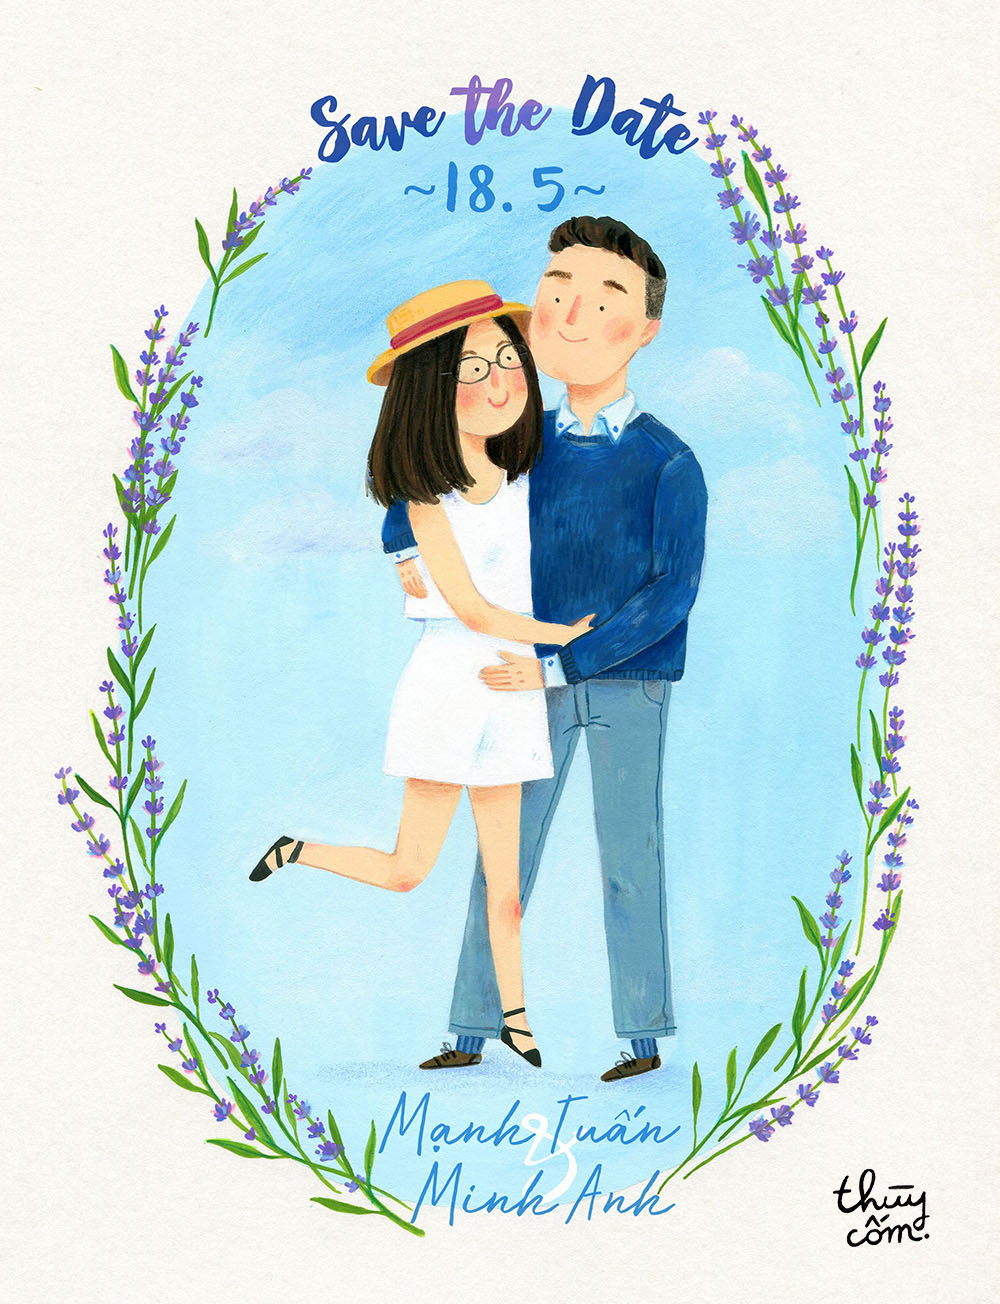 I take commission such as wedding invitation or portrait. The link to commission order form is on the sidebar.